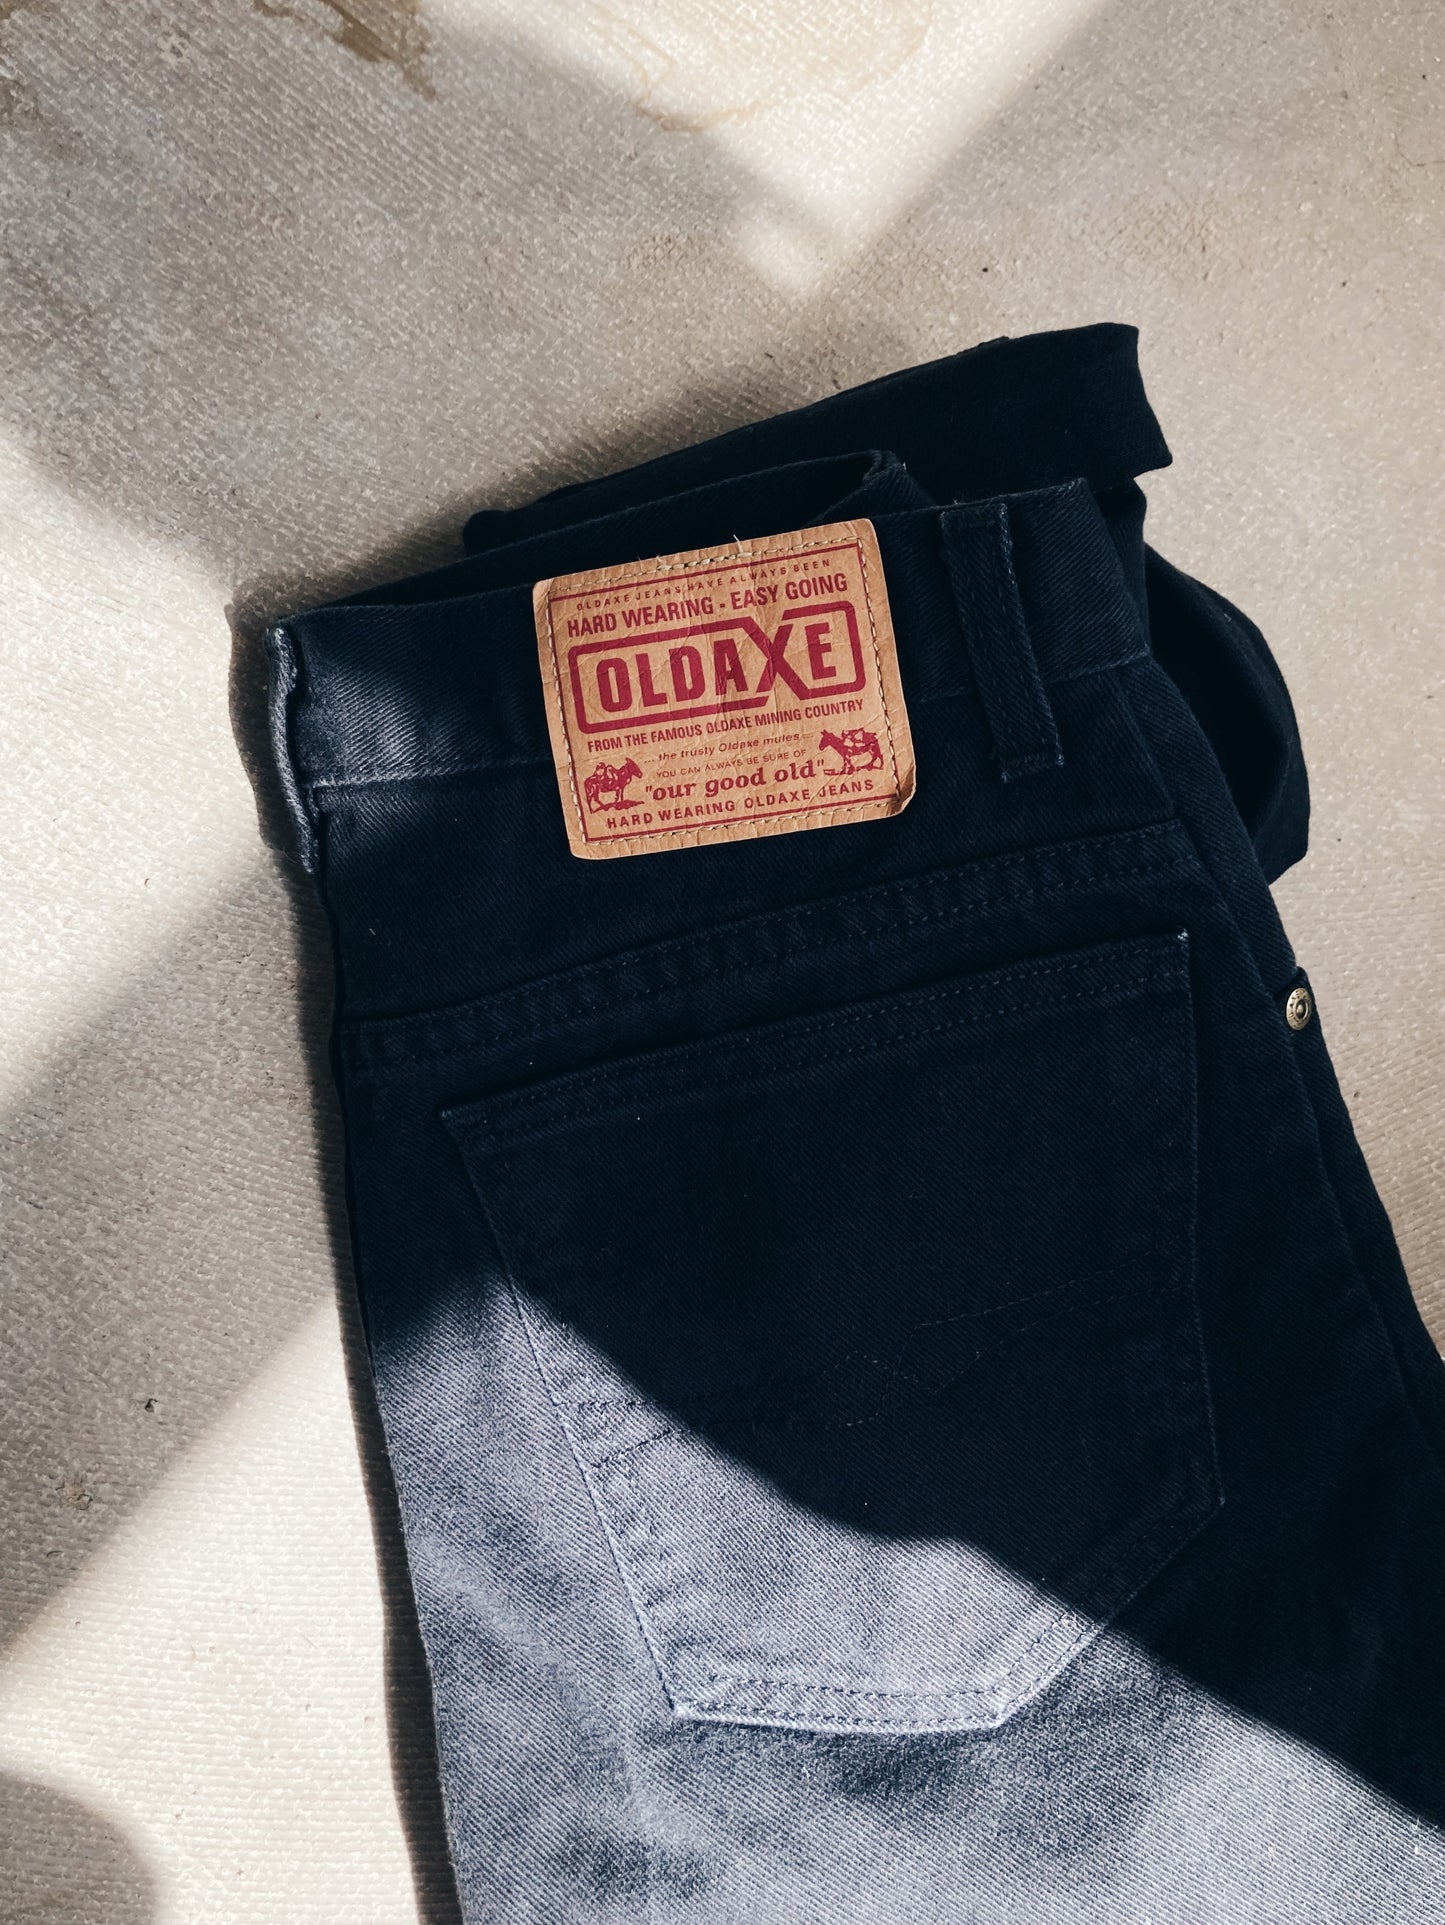 NEW IN! Oldaxe jeans